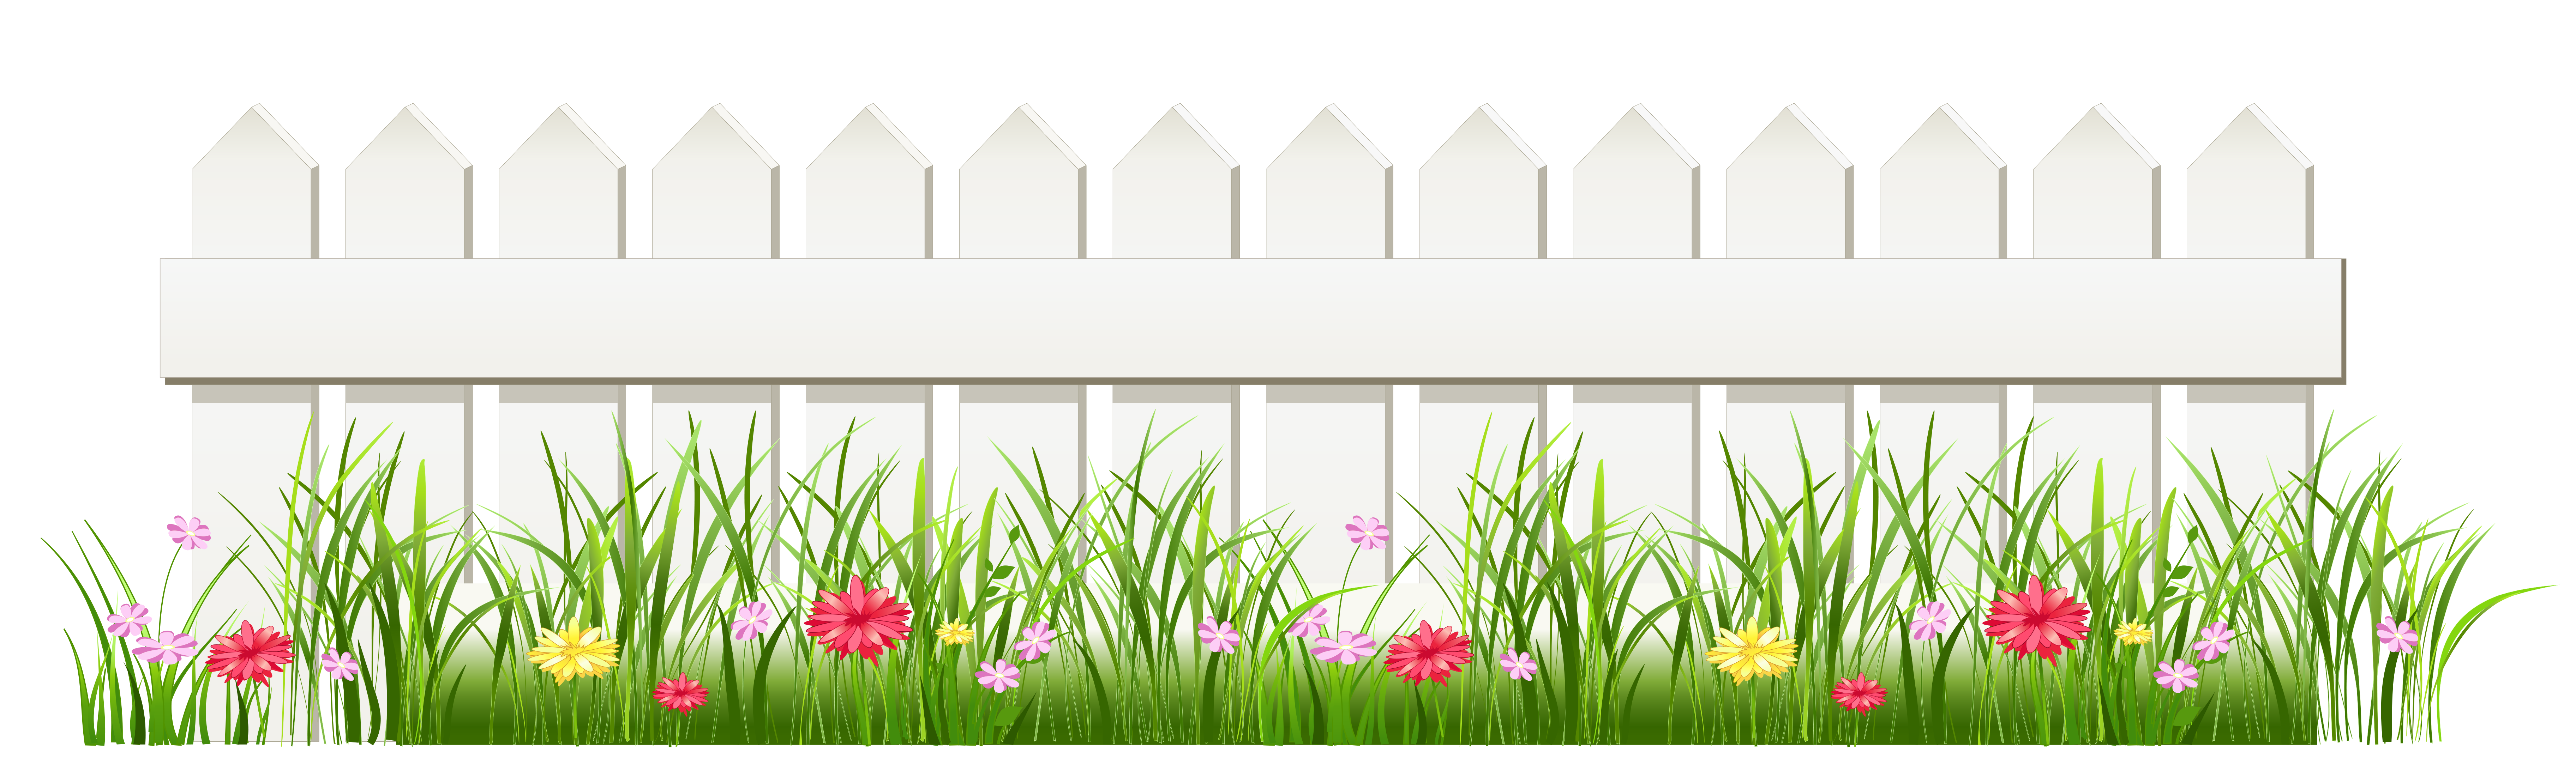 Transparent white fence with. Grass clipart template